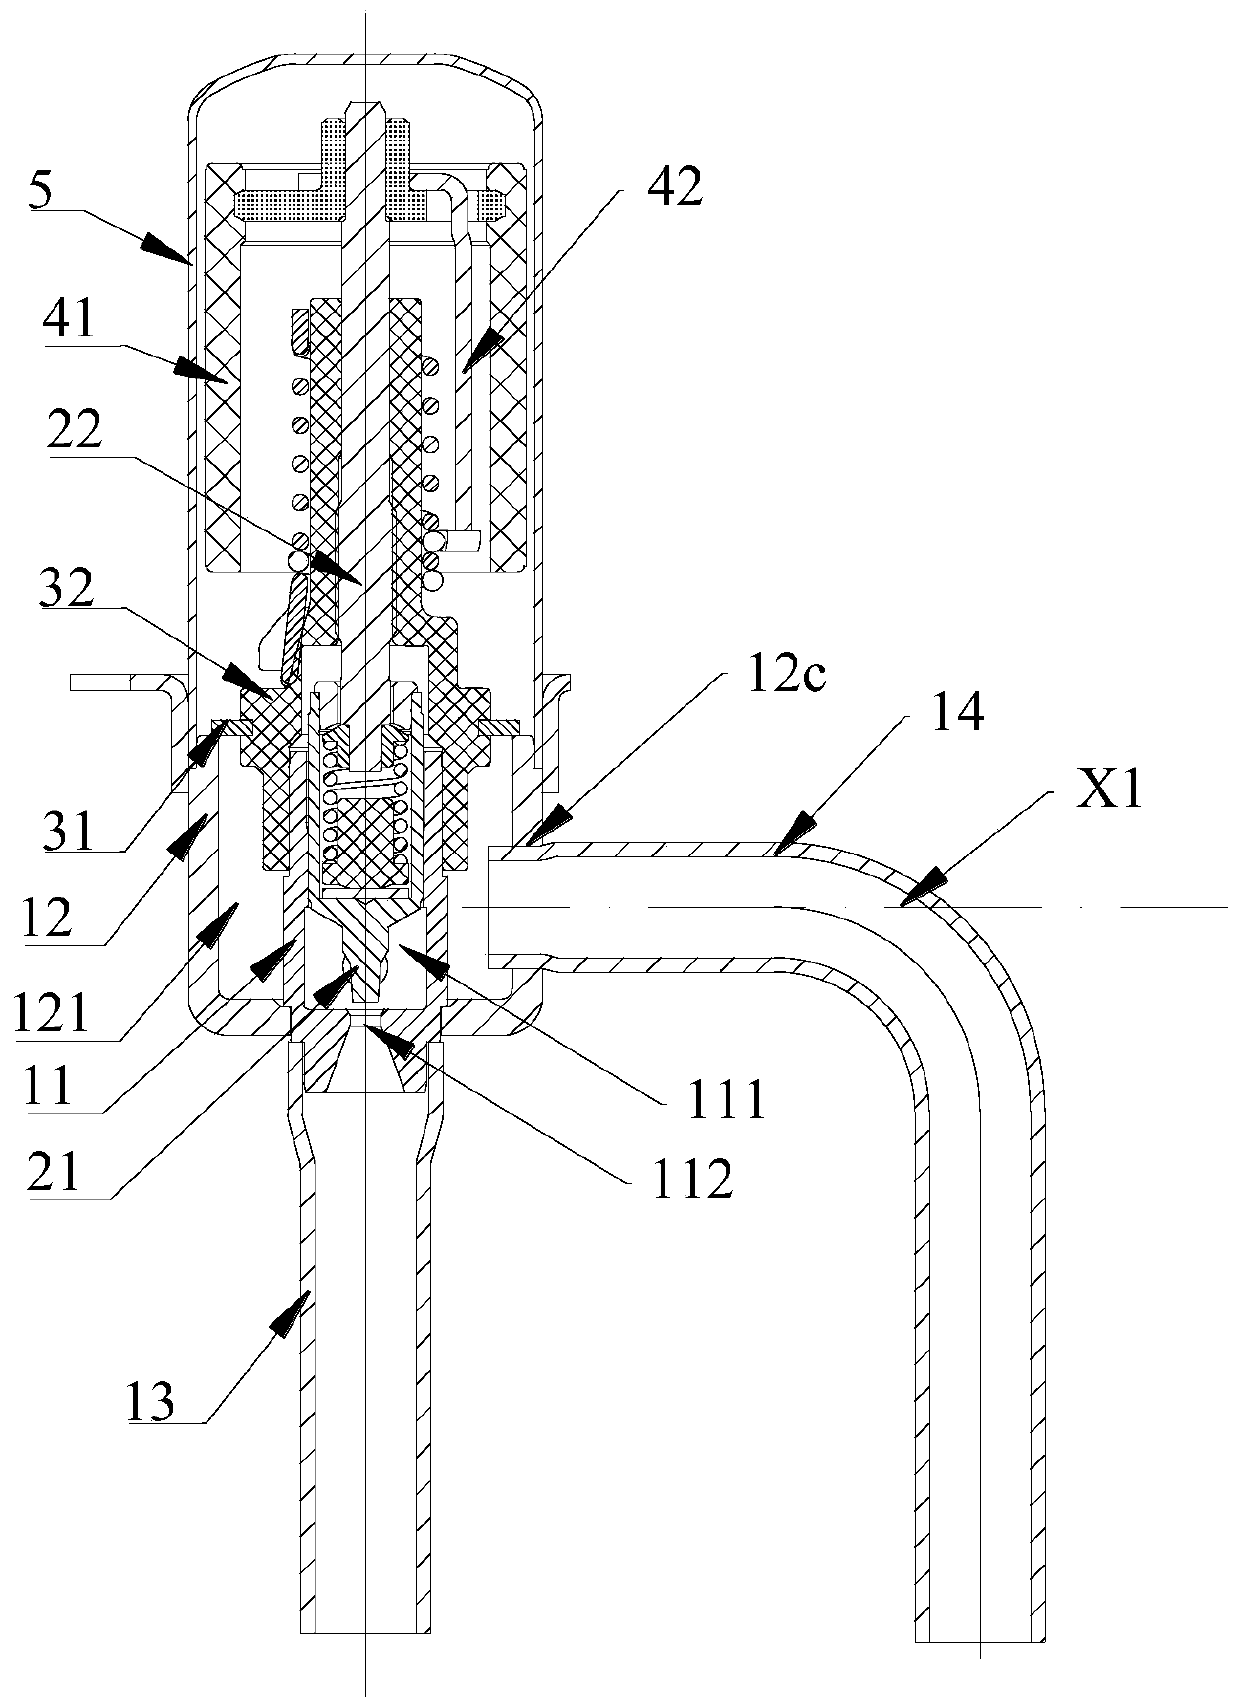 Electronic expansion valve and its seat assembly